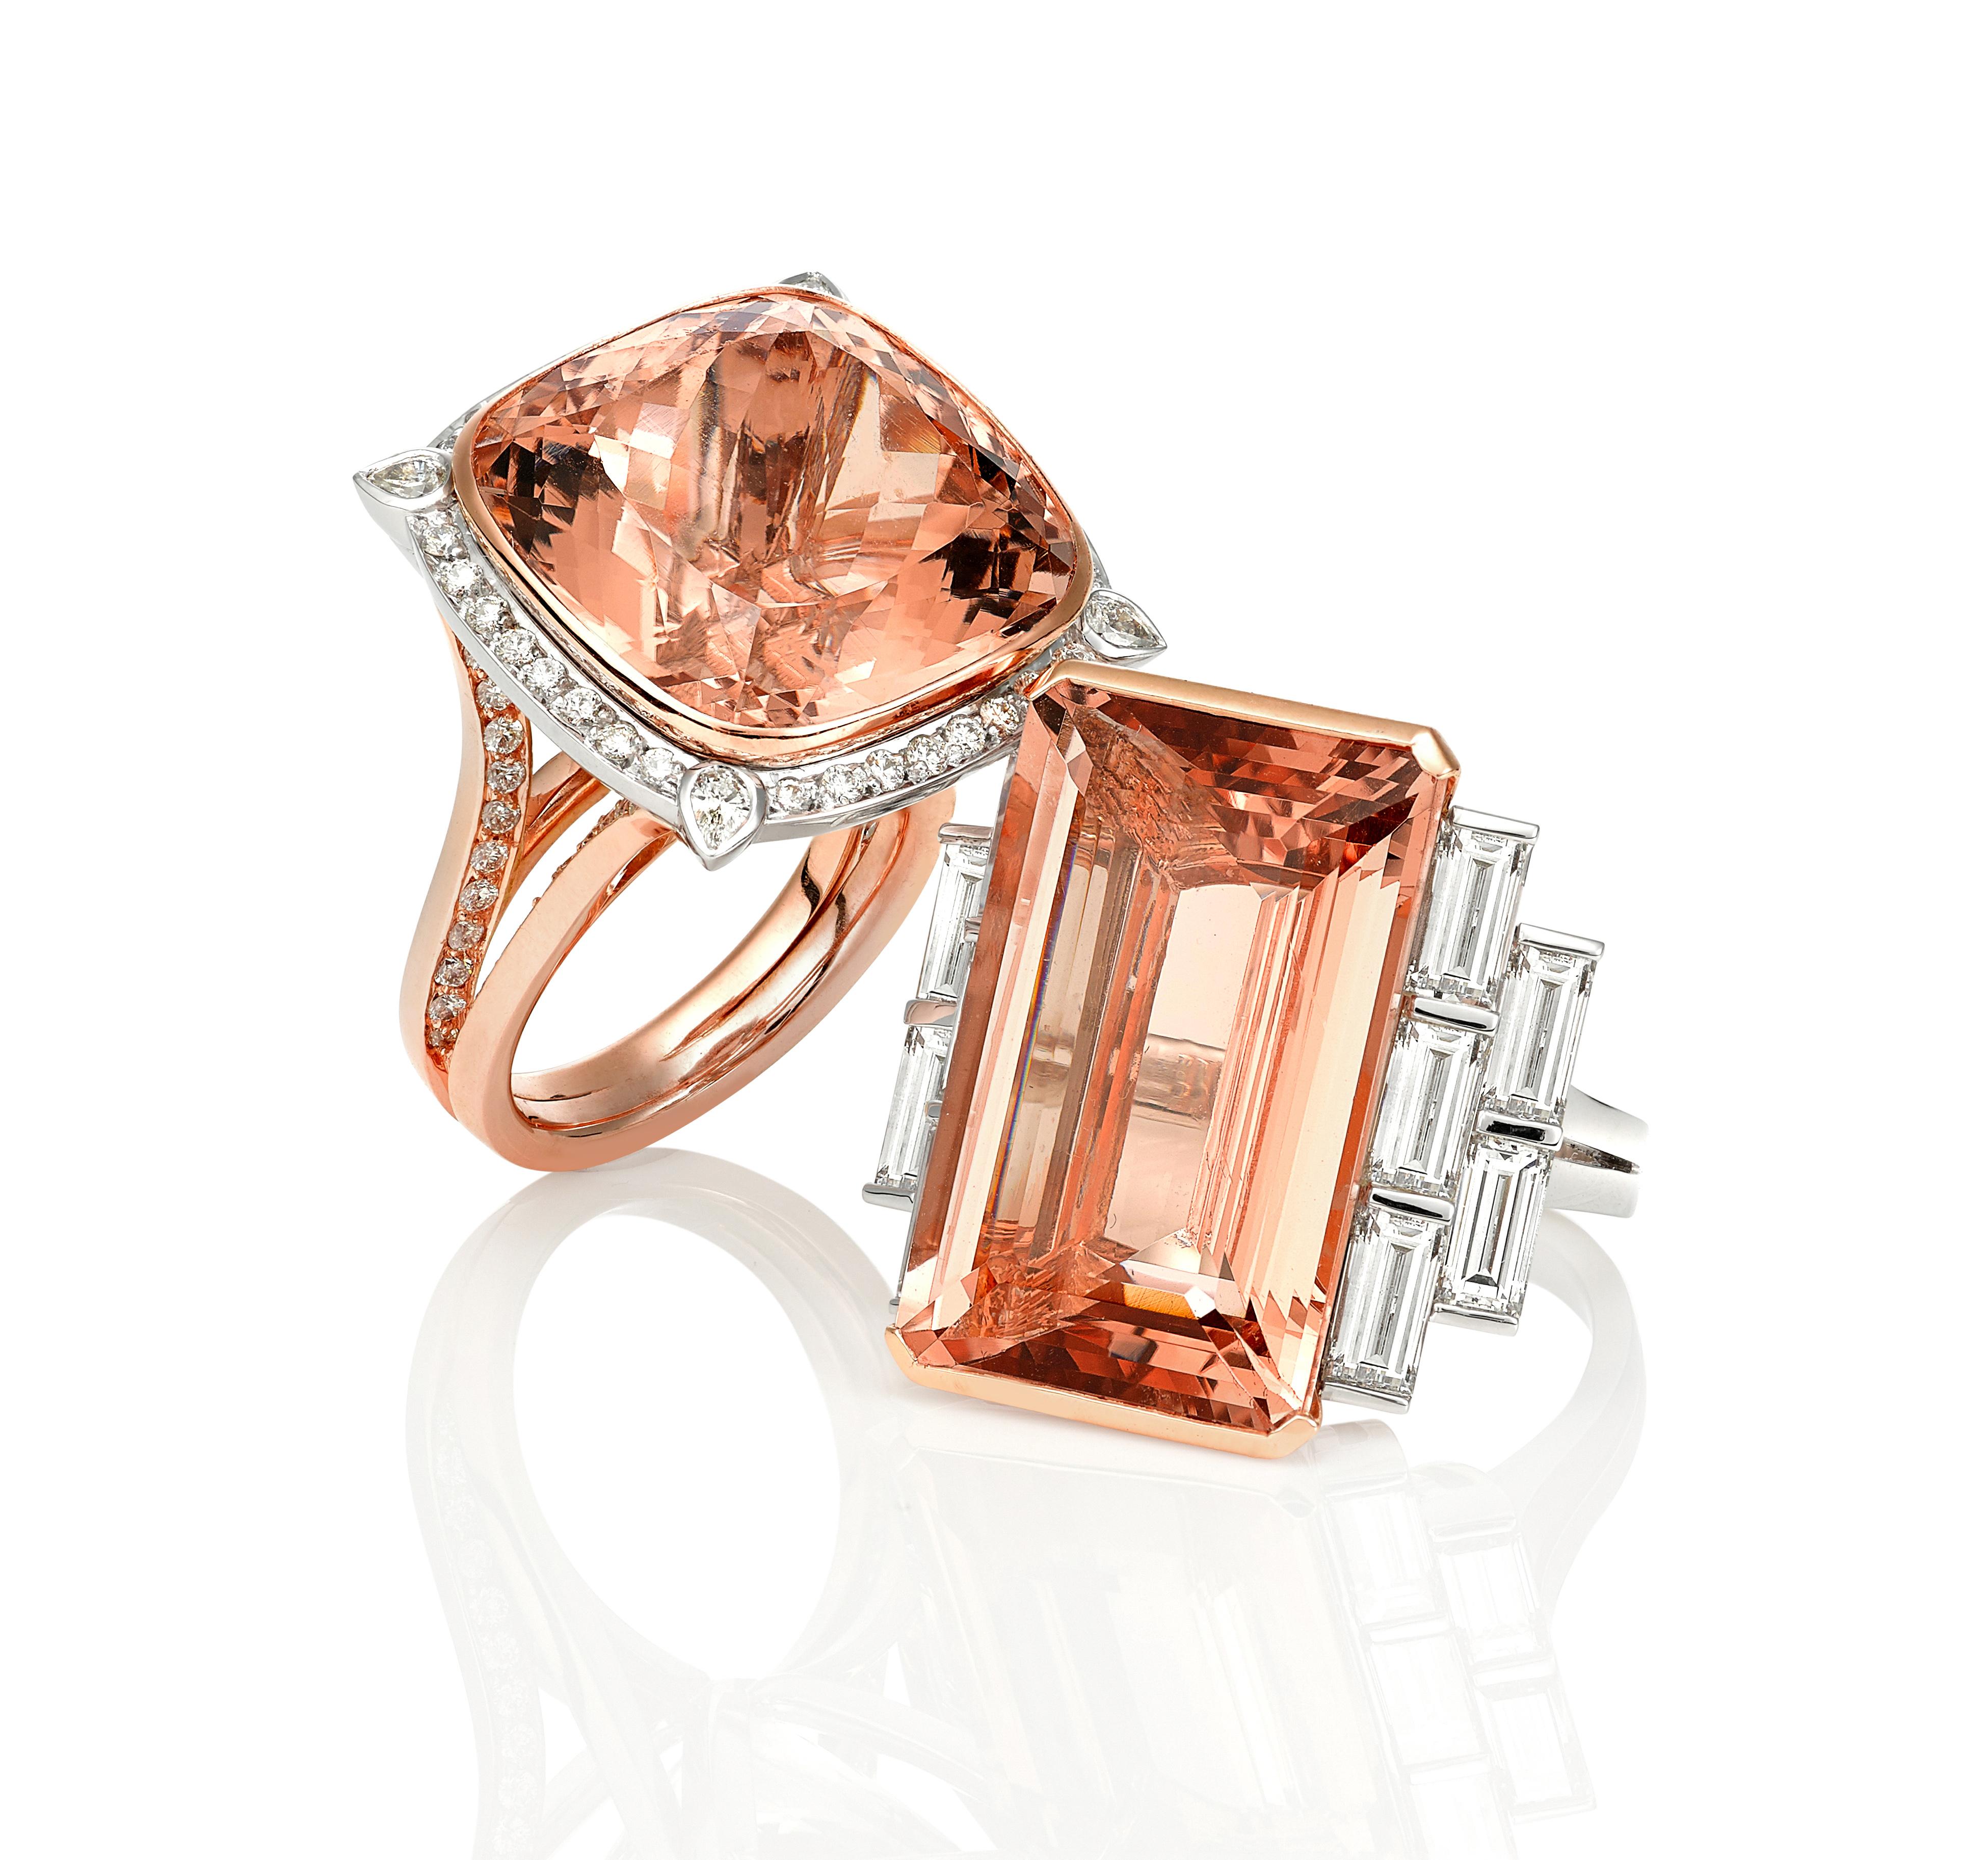 Handmade 18 carat Rose and White Gold Cocktail Ring, Set with one 26.50 Carat Emerald Cut Morganite, end set in a Rose Gold, with 10 Baguette cut white diamonds weighing 3.88 Carats, F in colour, VS in clarity, End set on the shoulders, suspended on